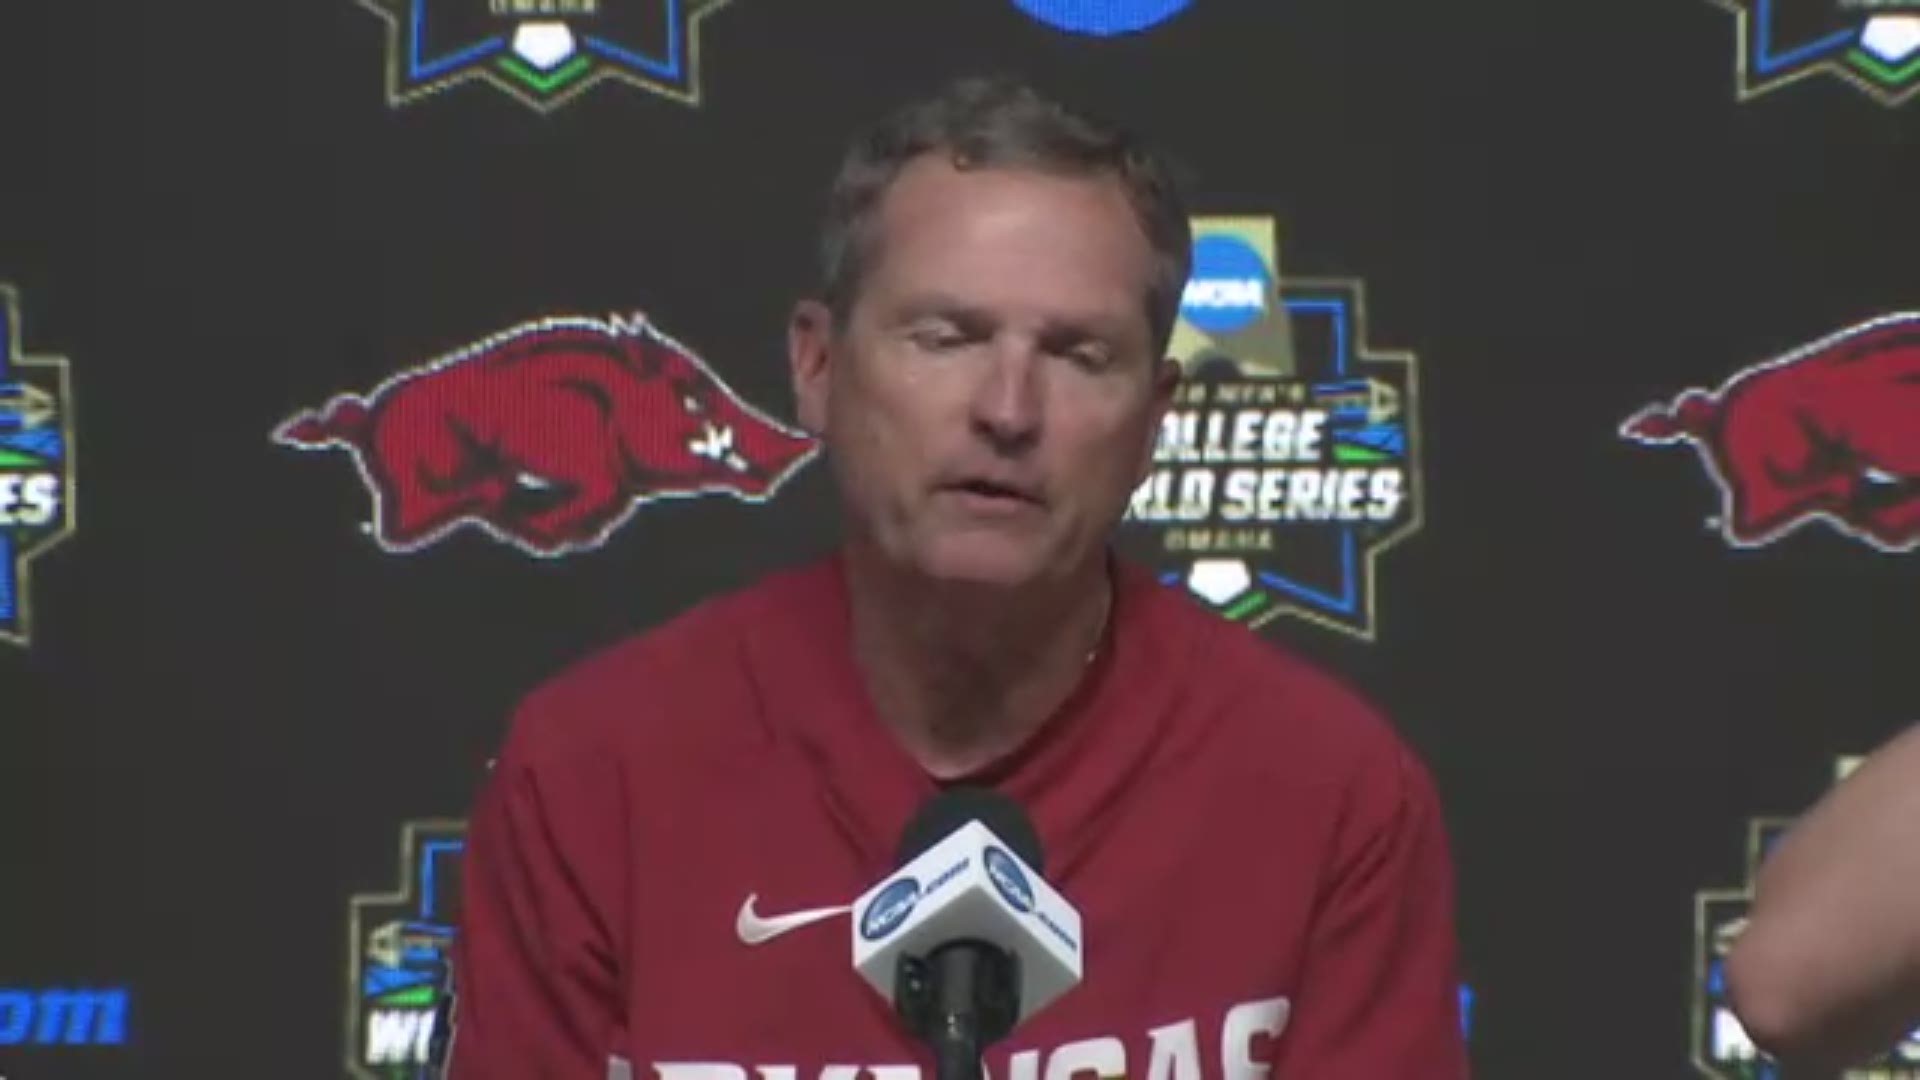 The Head Hog said that Monday's 5-4 loss to the Red Raiders came down to "who got the big hit, and who didn't".